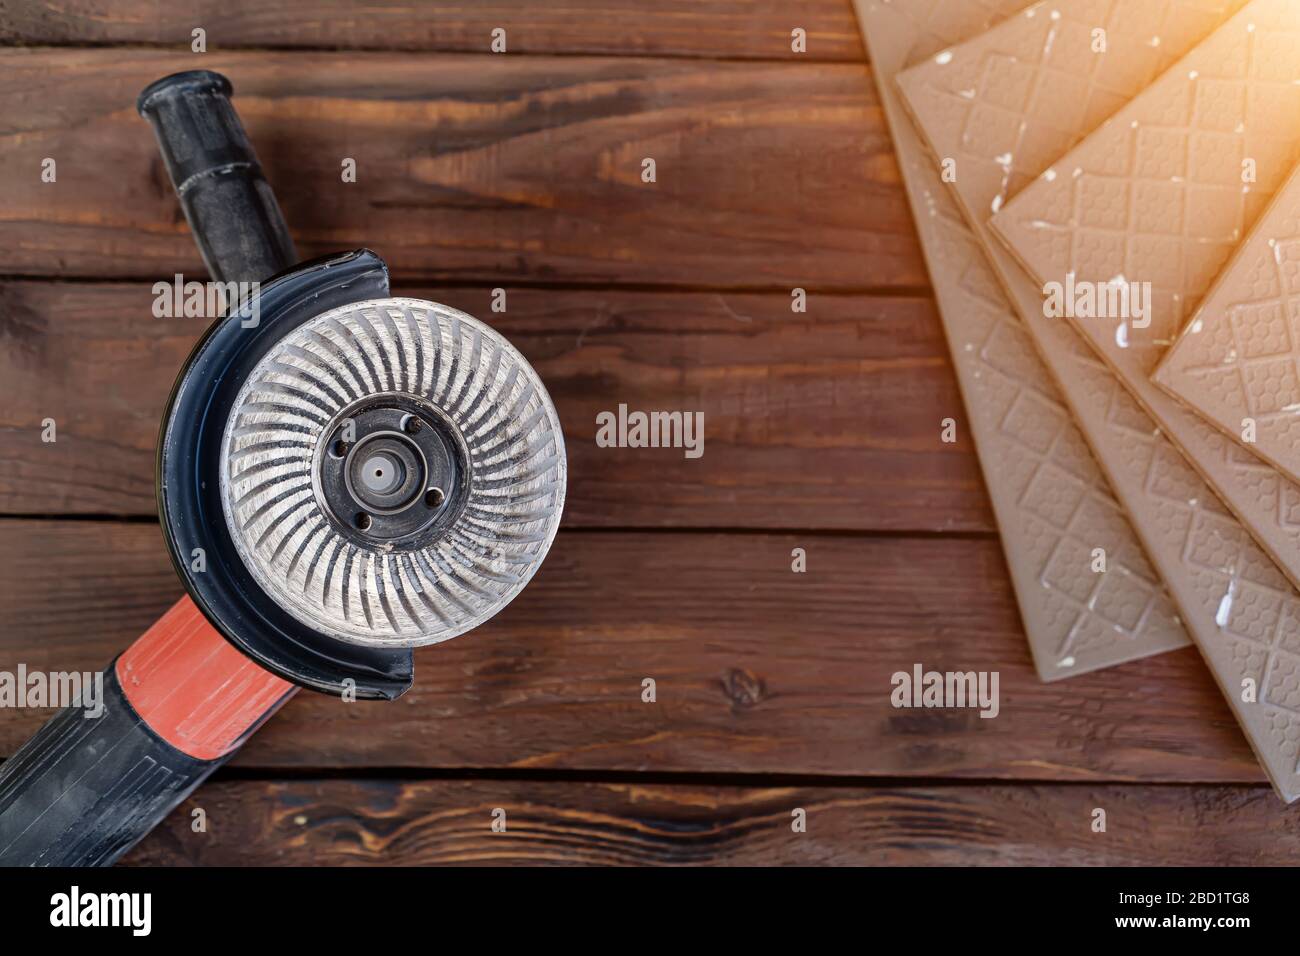 angle grinder and ceramic tile on a wooden background Stock Photo